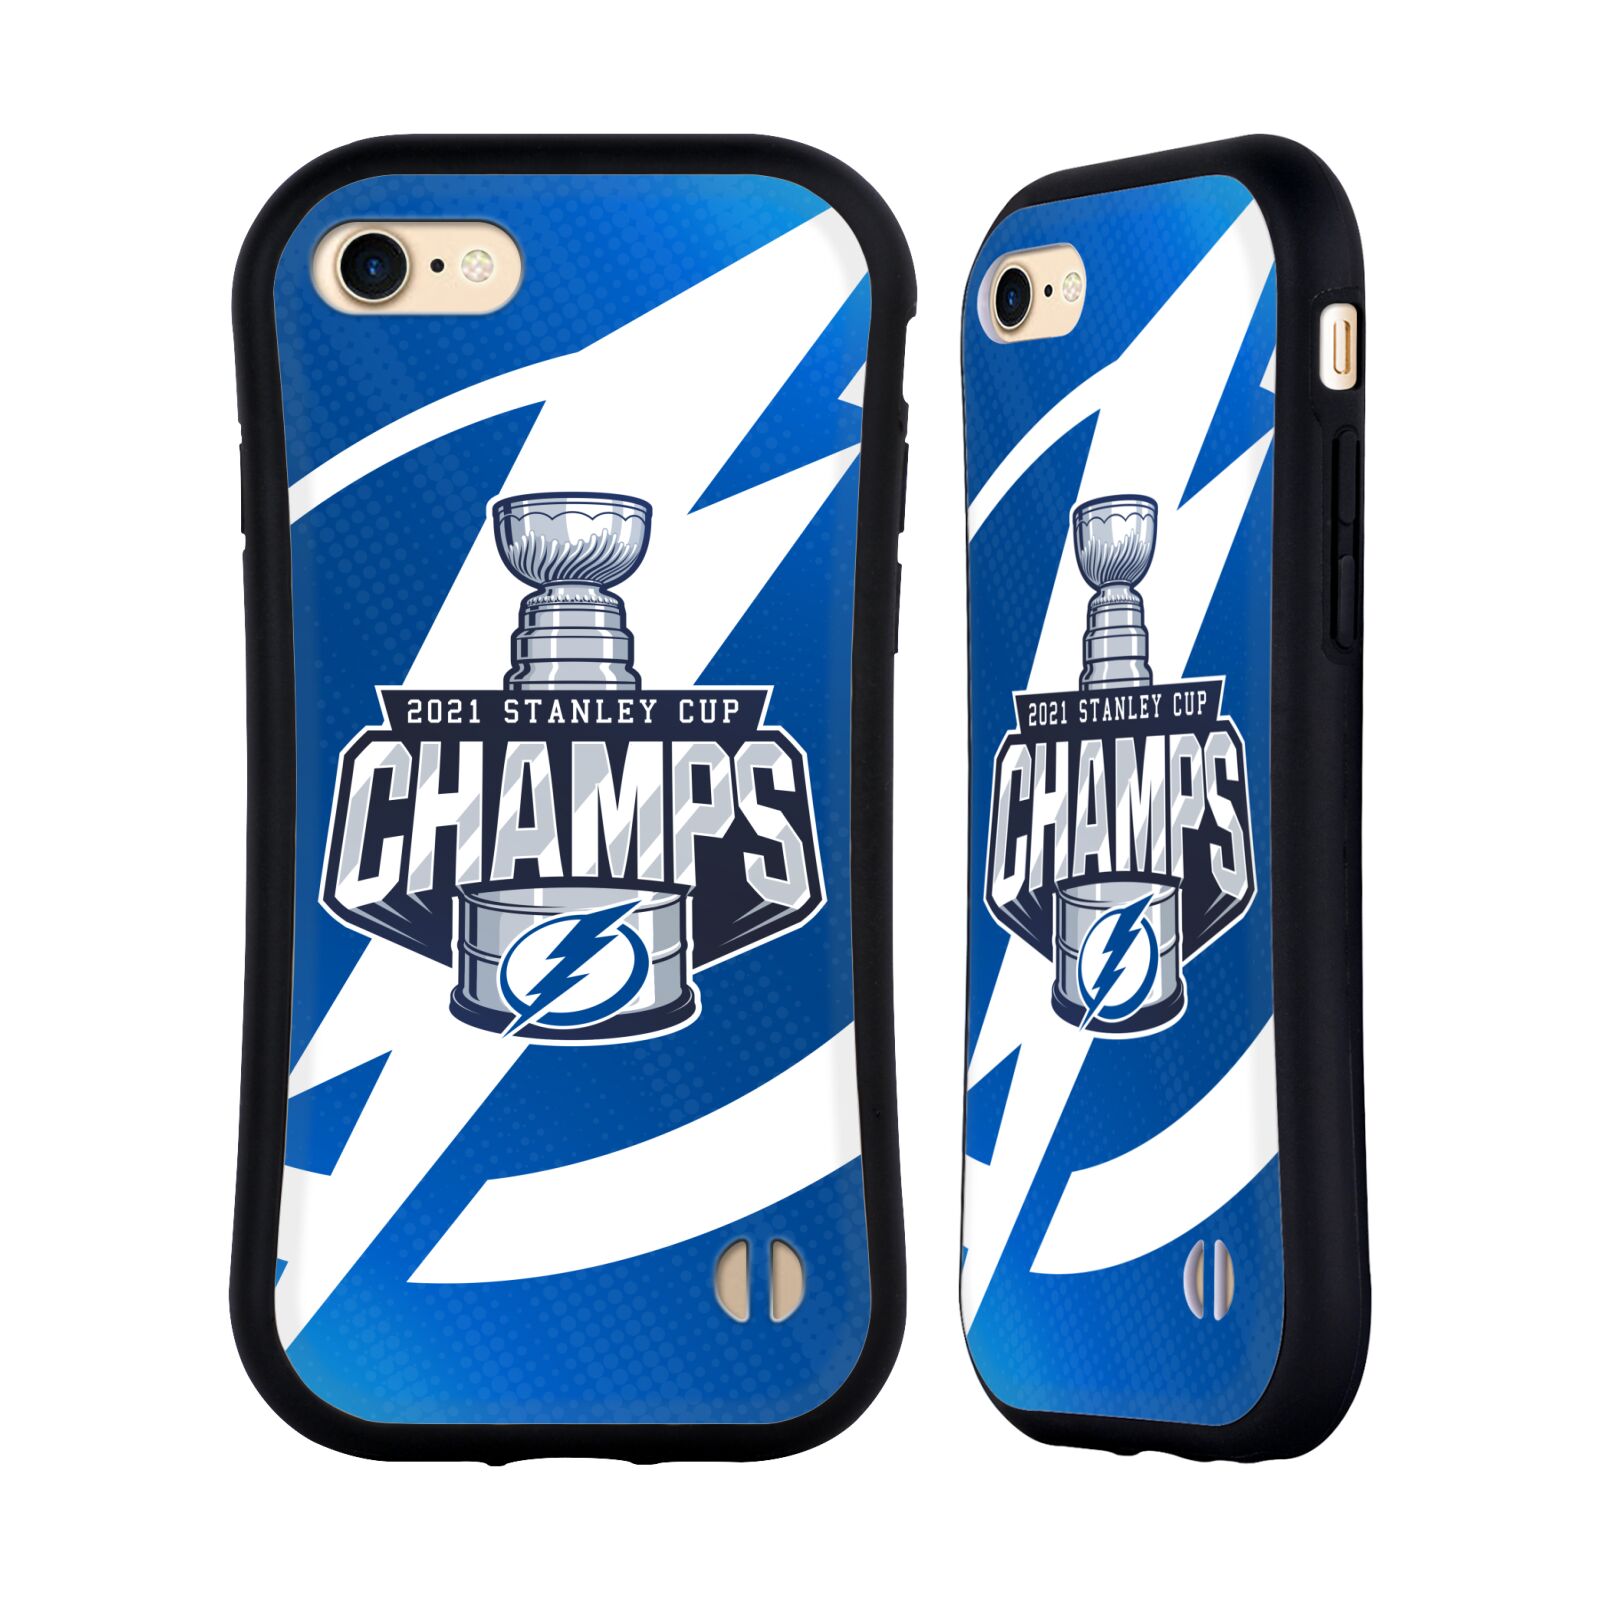 Obal na mobil Apple iPhone 7/8, SE 2020 - HEAD CASE - NHL - Stanely Cup 2021 Tampa Bay